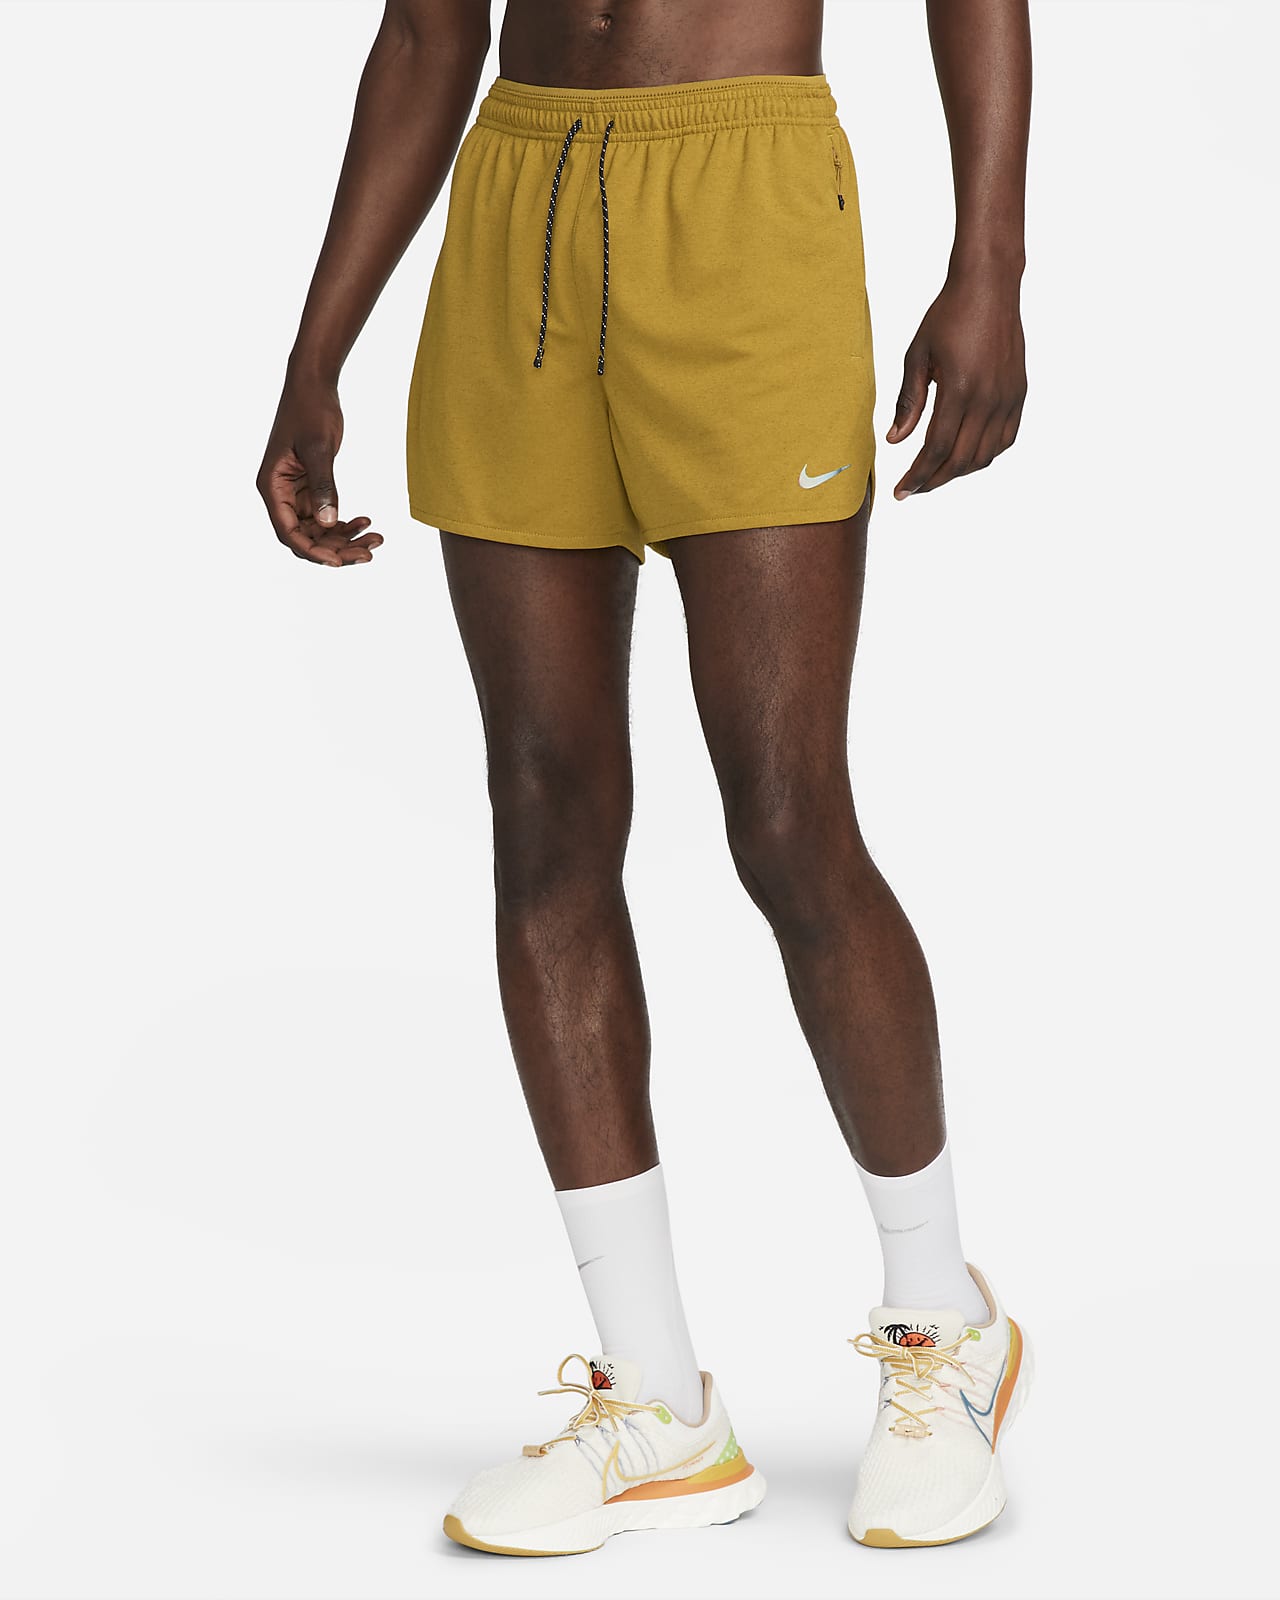 Nike Clothes for Men: All the Shoes, Shorts, Sweats, and More to